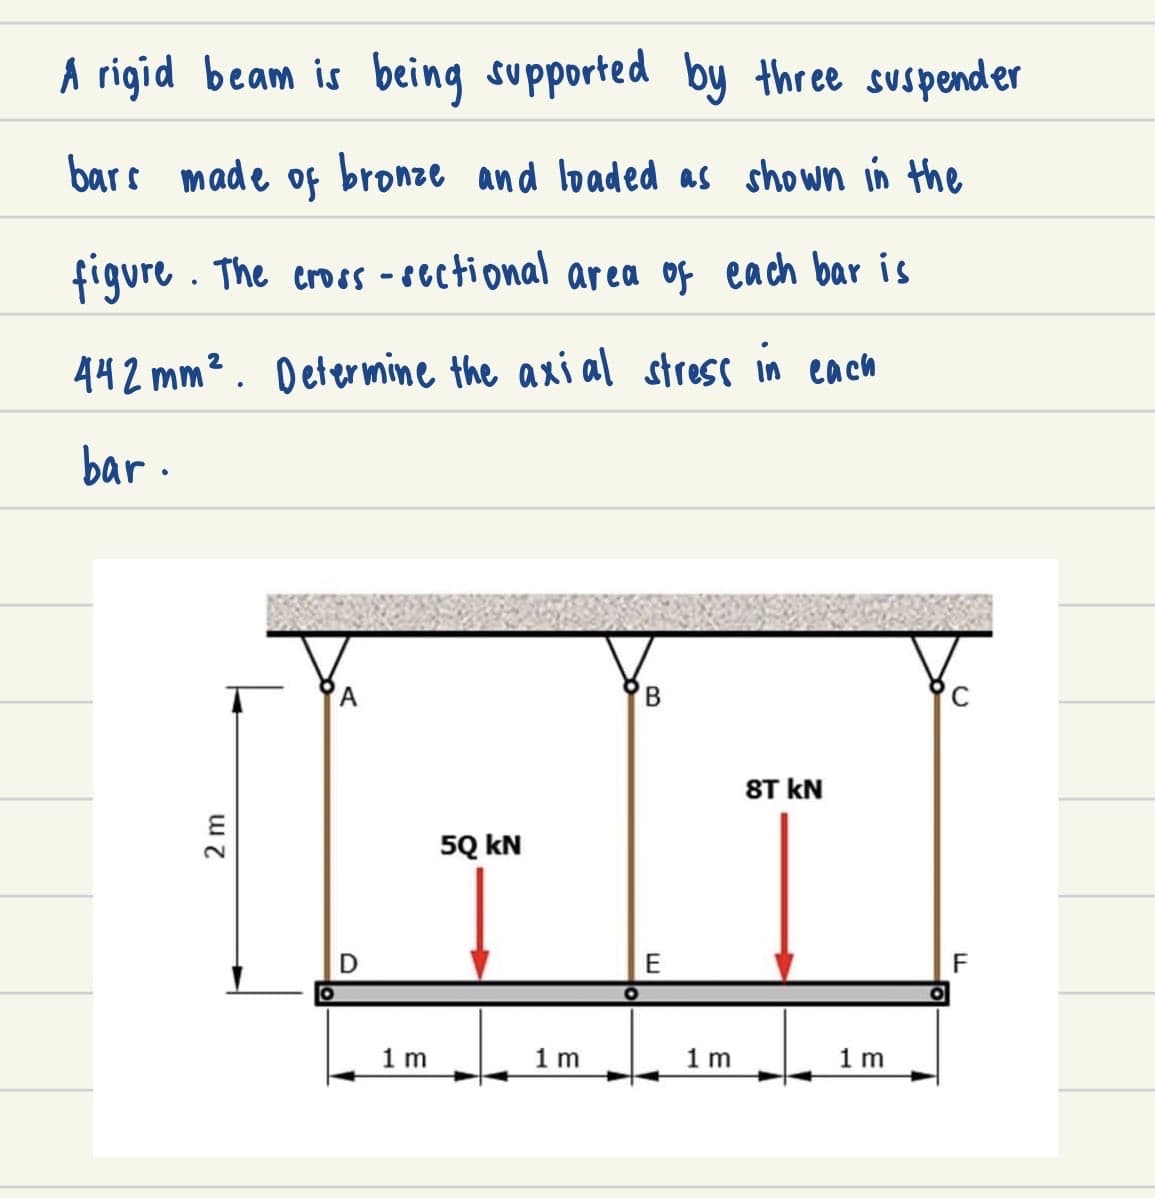 A rigid beam is being supported by three suspender
bars made of bronze and loaded as shown in the
figure. The cross-sectional area of each bar is
442 mm². Determine the axial stress in each
bar.
B
2 m
O
1 m
5Q KN
1 m
O
E
1 m
8T KN
1 m
LL